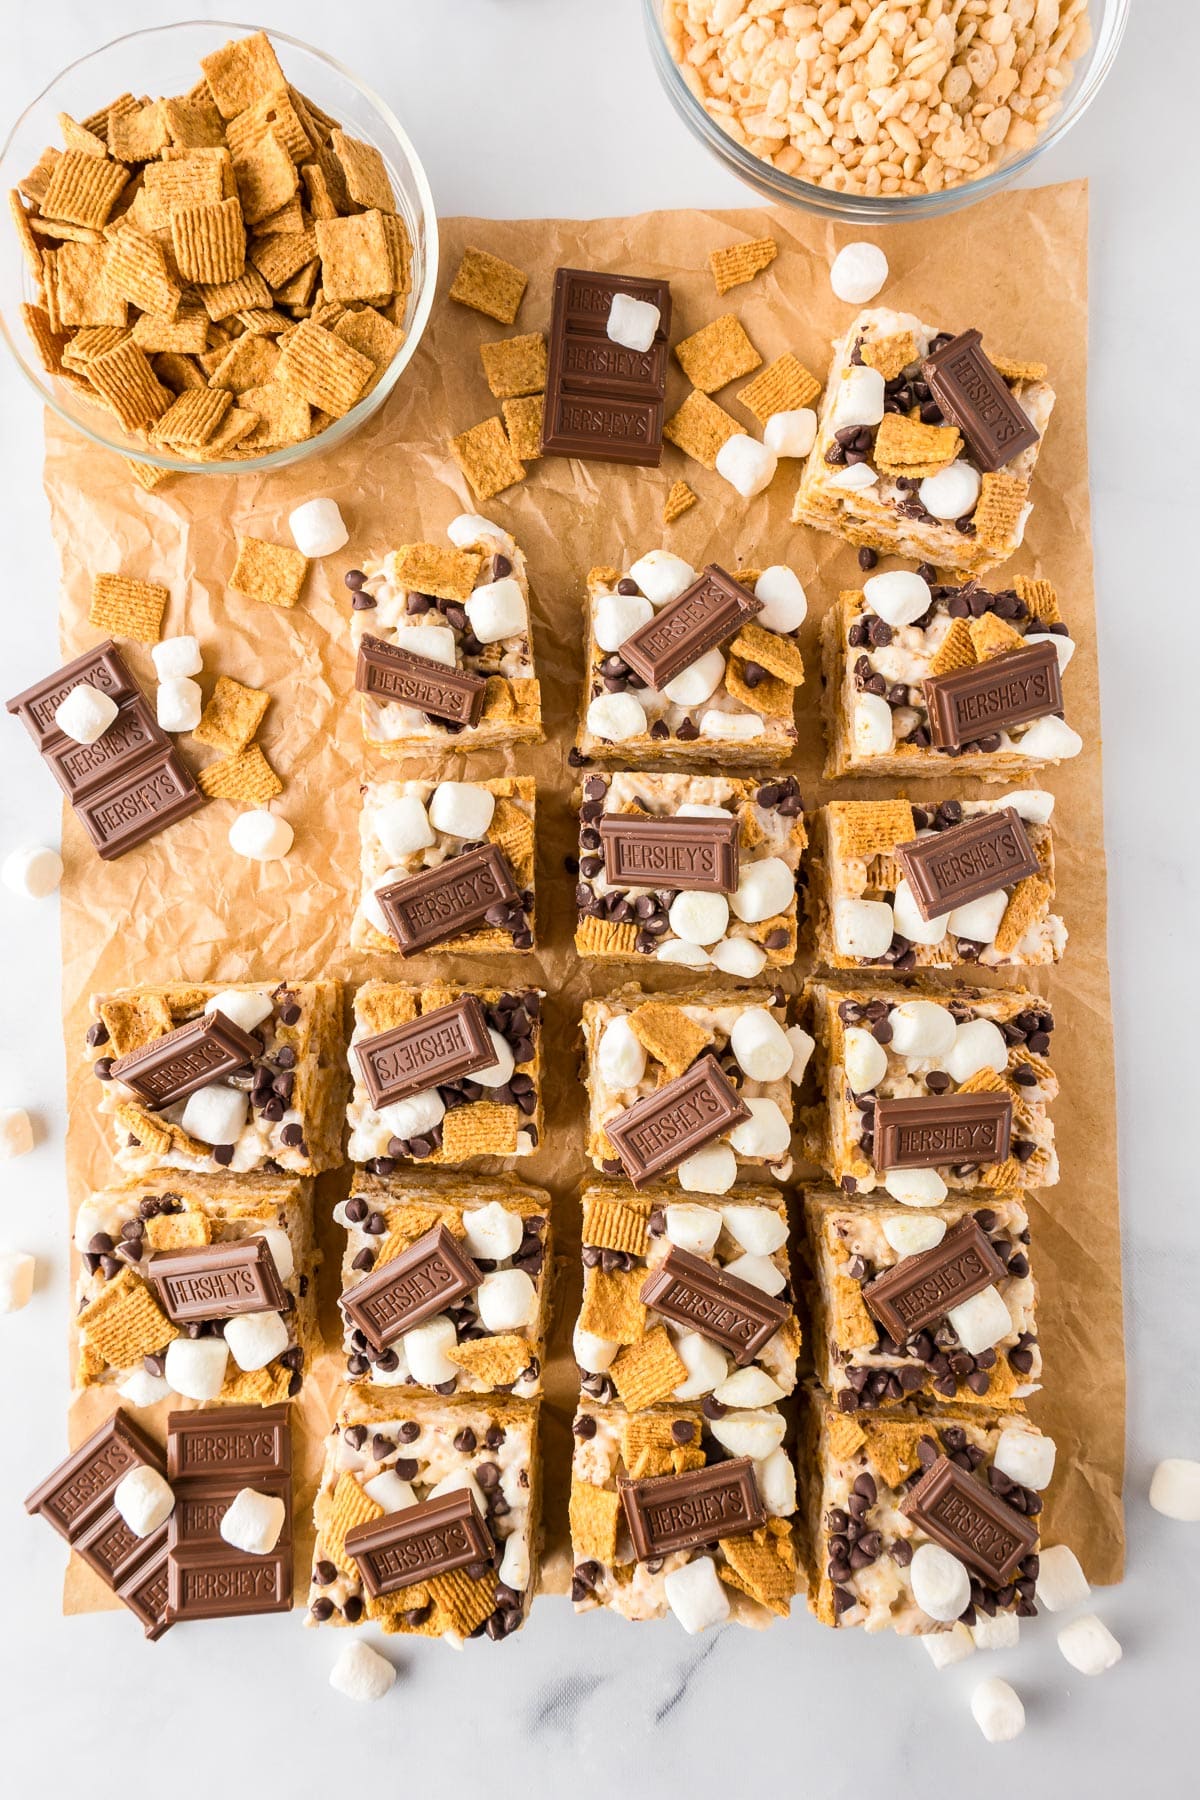 A tray of s'mores bars cut into squares, topped with mini marshmallows, chocolate pieces, and cereal from overhead on parchment paper.